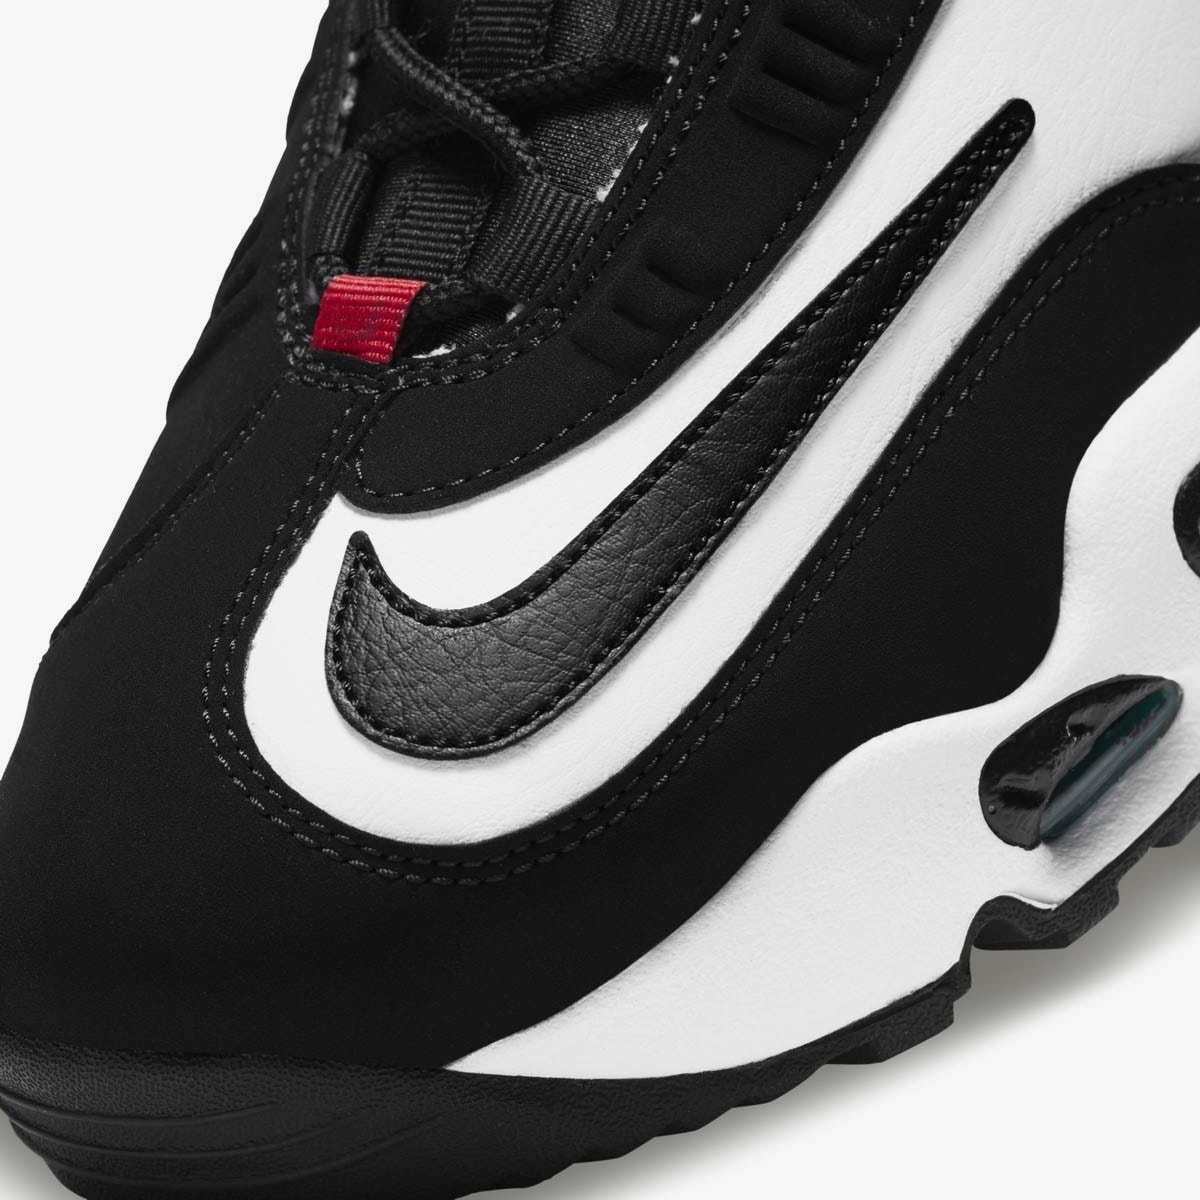 nike sportswear air ken griffey jr max 1 freshwater white black varsity red official release date info photos price store list buying guide